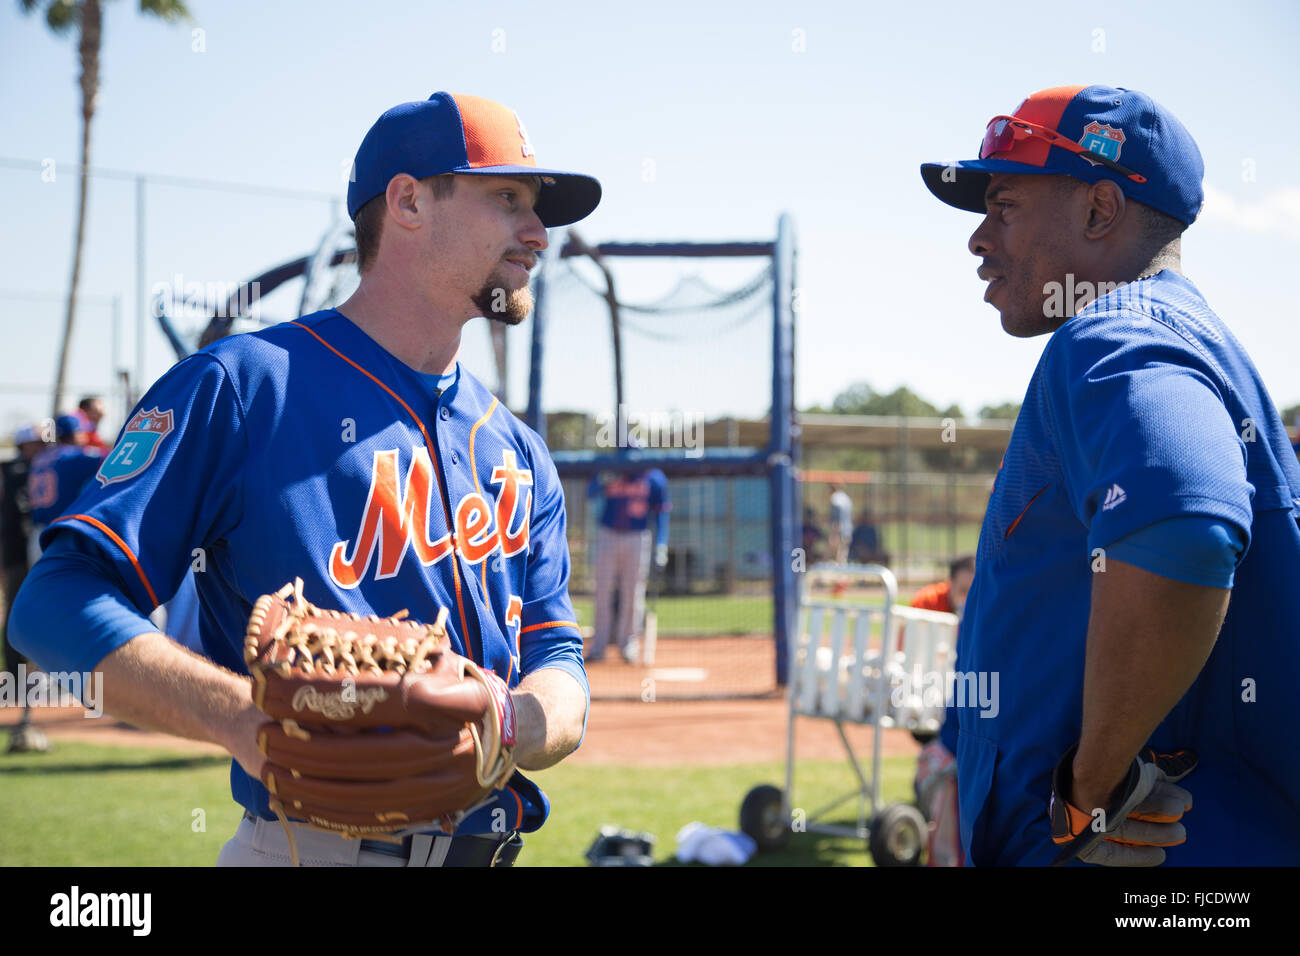 Port St Lucie, United States. 27th Feb, 2016. New York Mets baseball players Logan Verrett and Curtis Granderson training at Tradition Field in Port St Lucie, Florida. © Louise Wateridge/Pacific Press/Alamy Live News Stock Photo